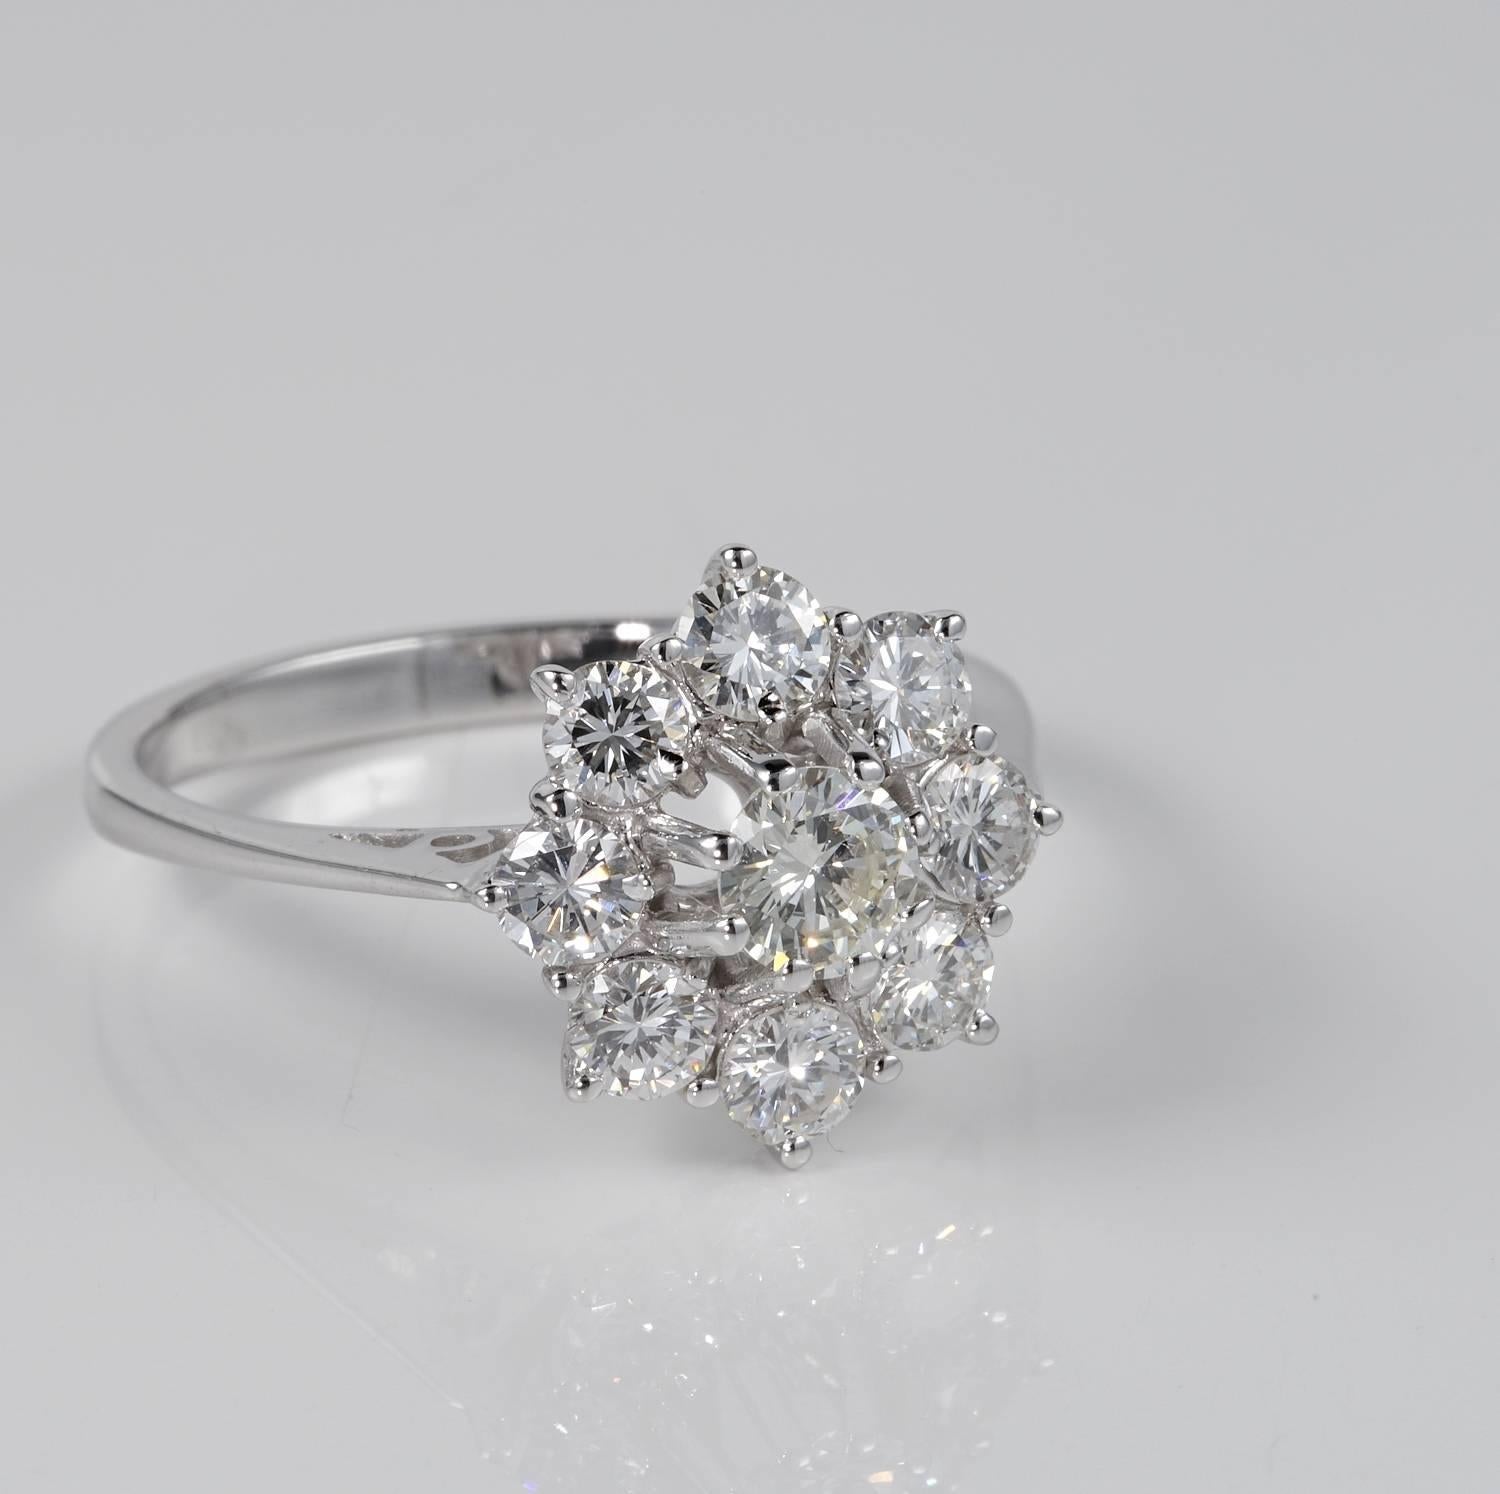 A dreaming and high quality Diamond cluster ring set throughout with extremely fine round brilliant cut Diamonds
rated as G VVS for a total content of 1.45 Carat
Diamonds project an amazing amount of sparkle thank to the great quality either